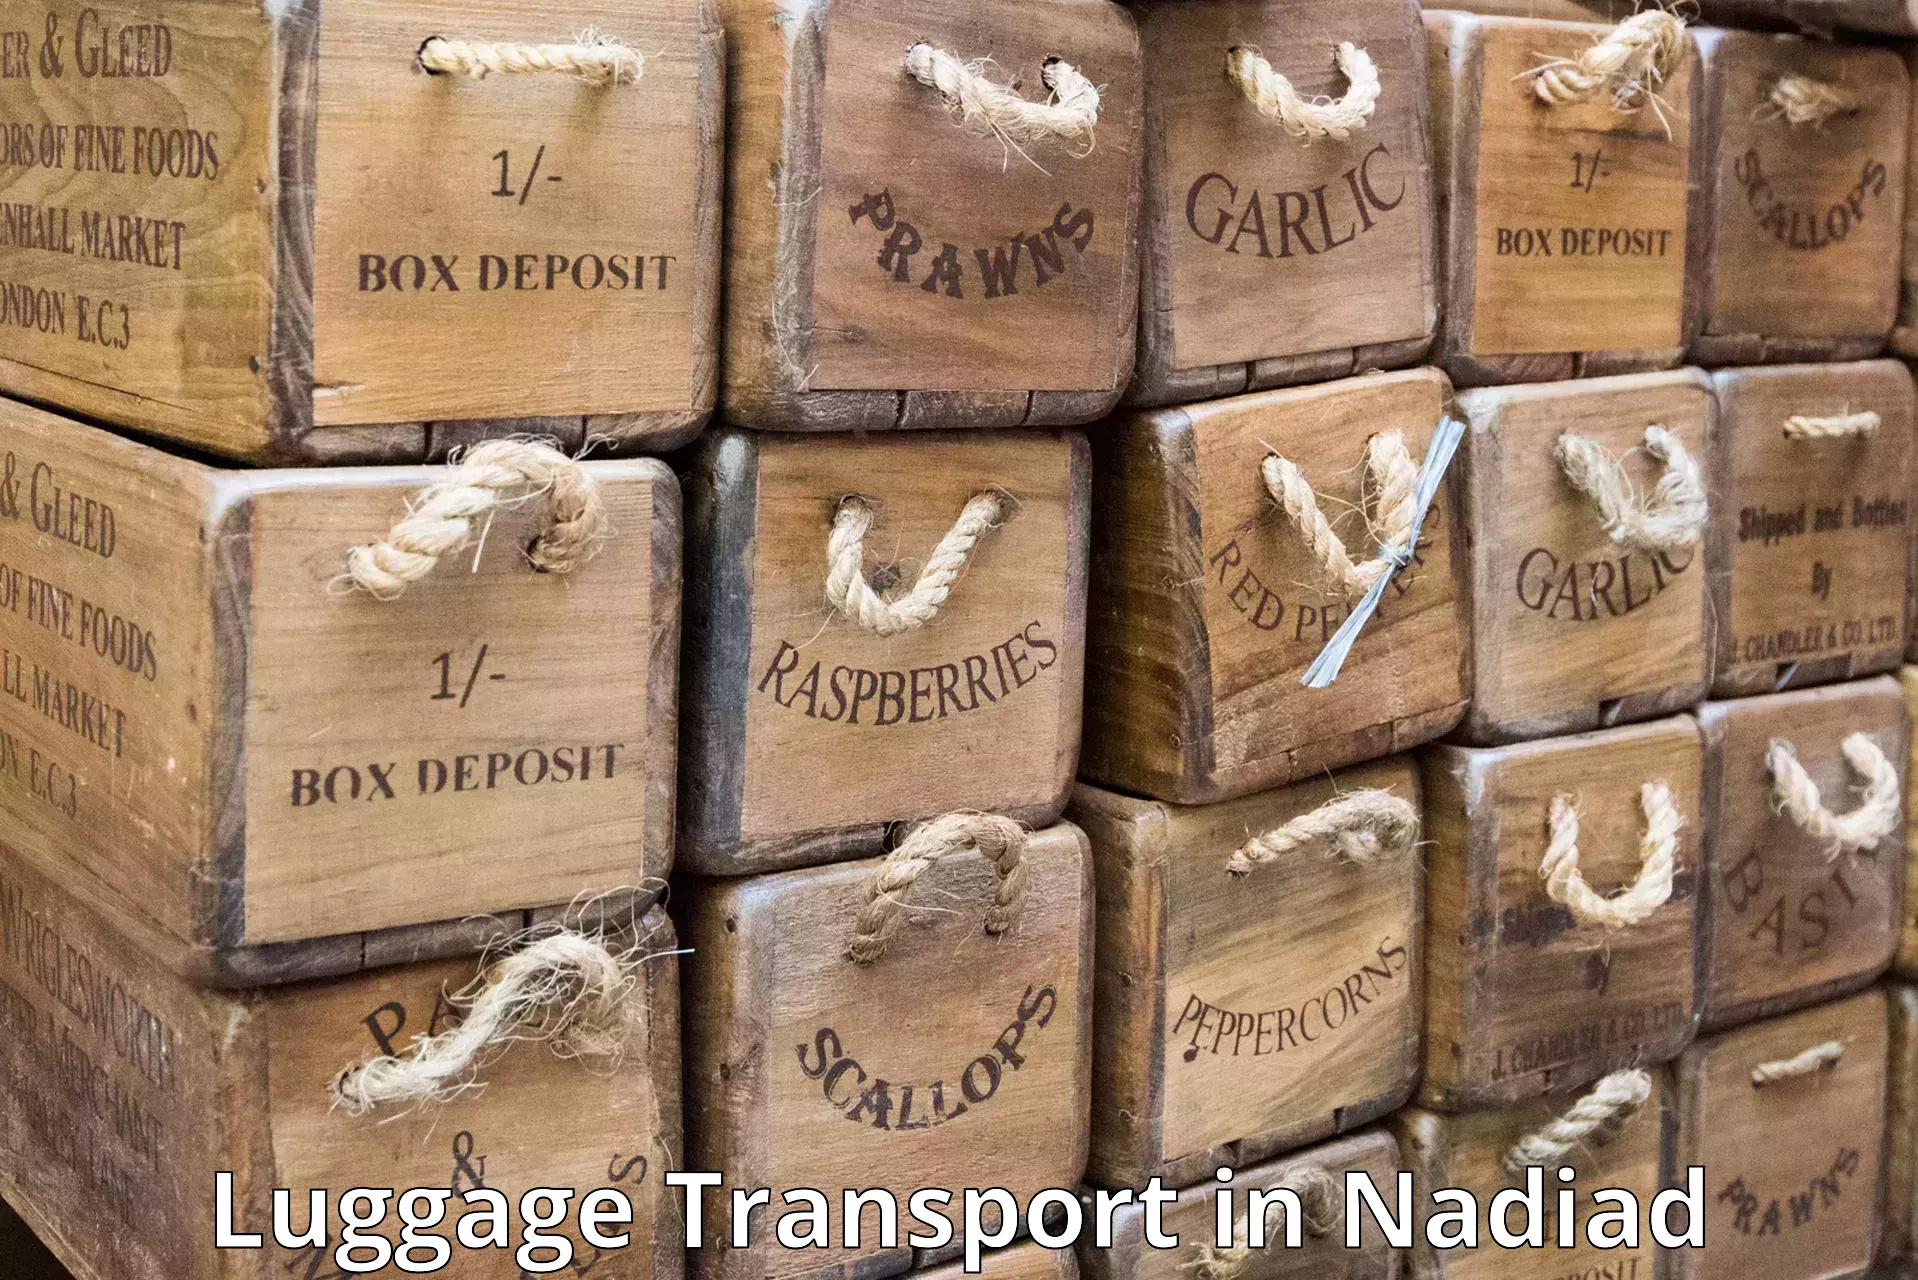 Luggage transport rates in Nadiad